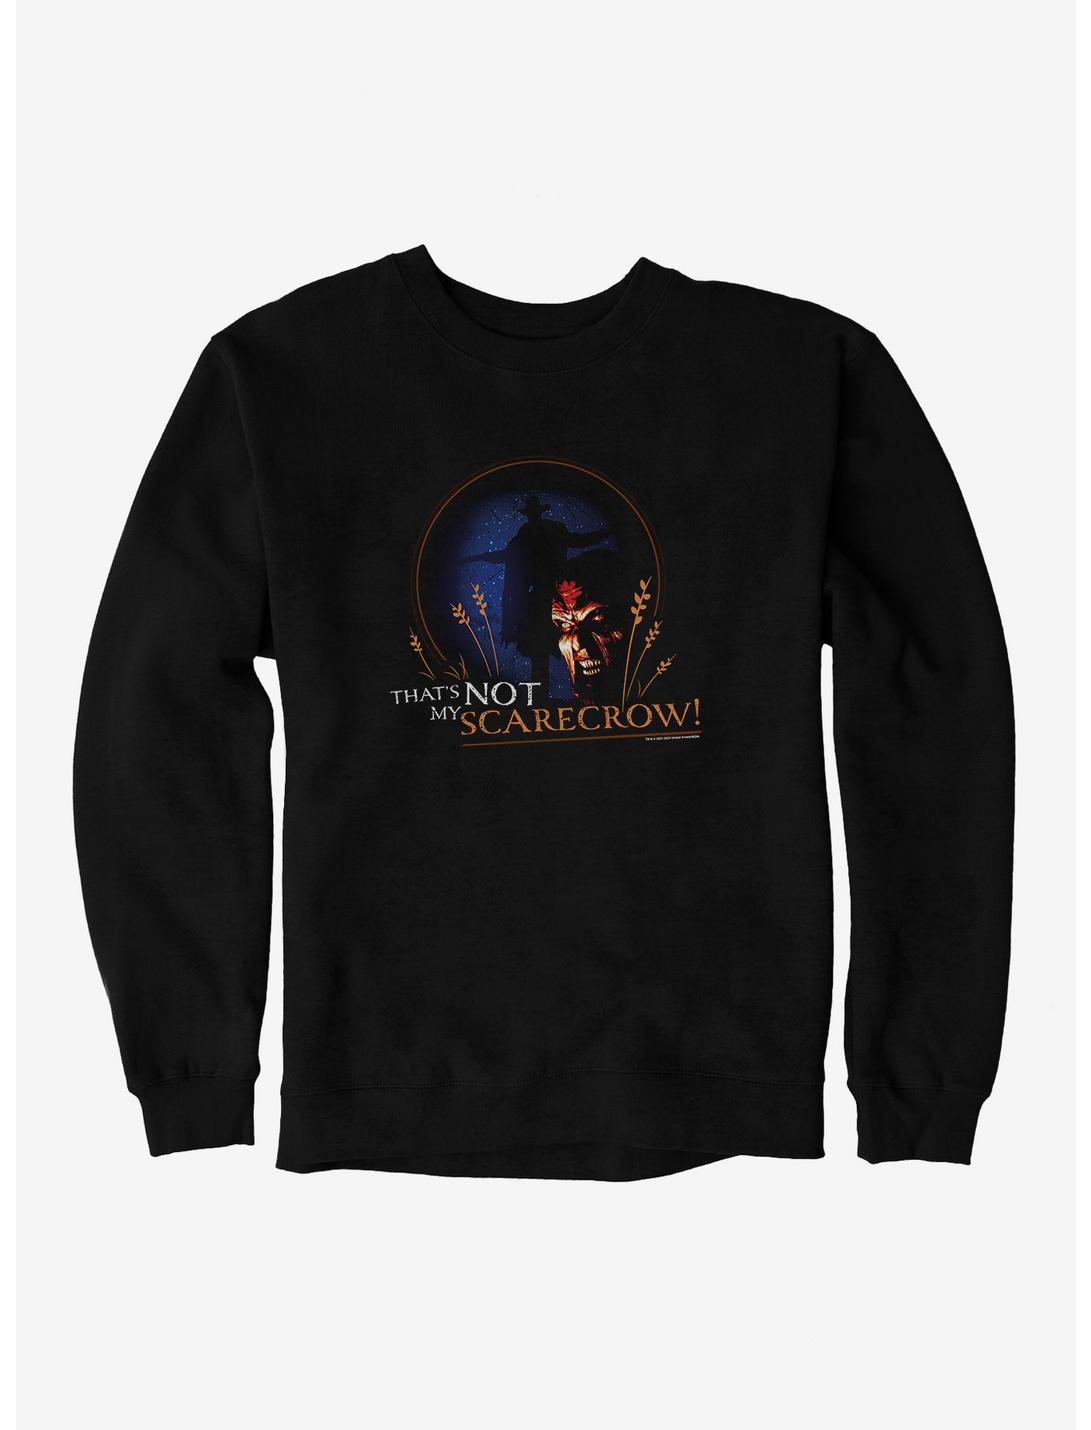 Jeepers Creepers That's Not My Scarecrow Sweatshirt, BLACK, hi-res